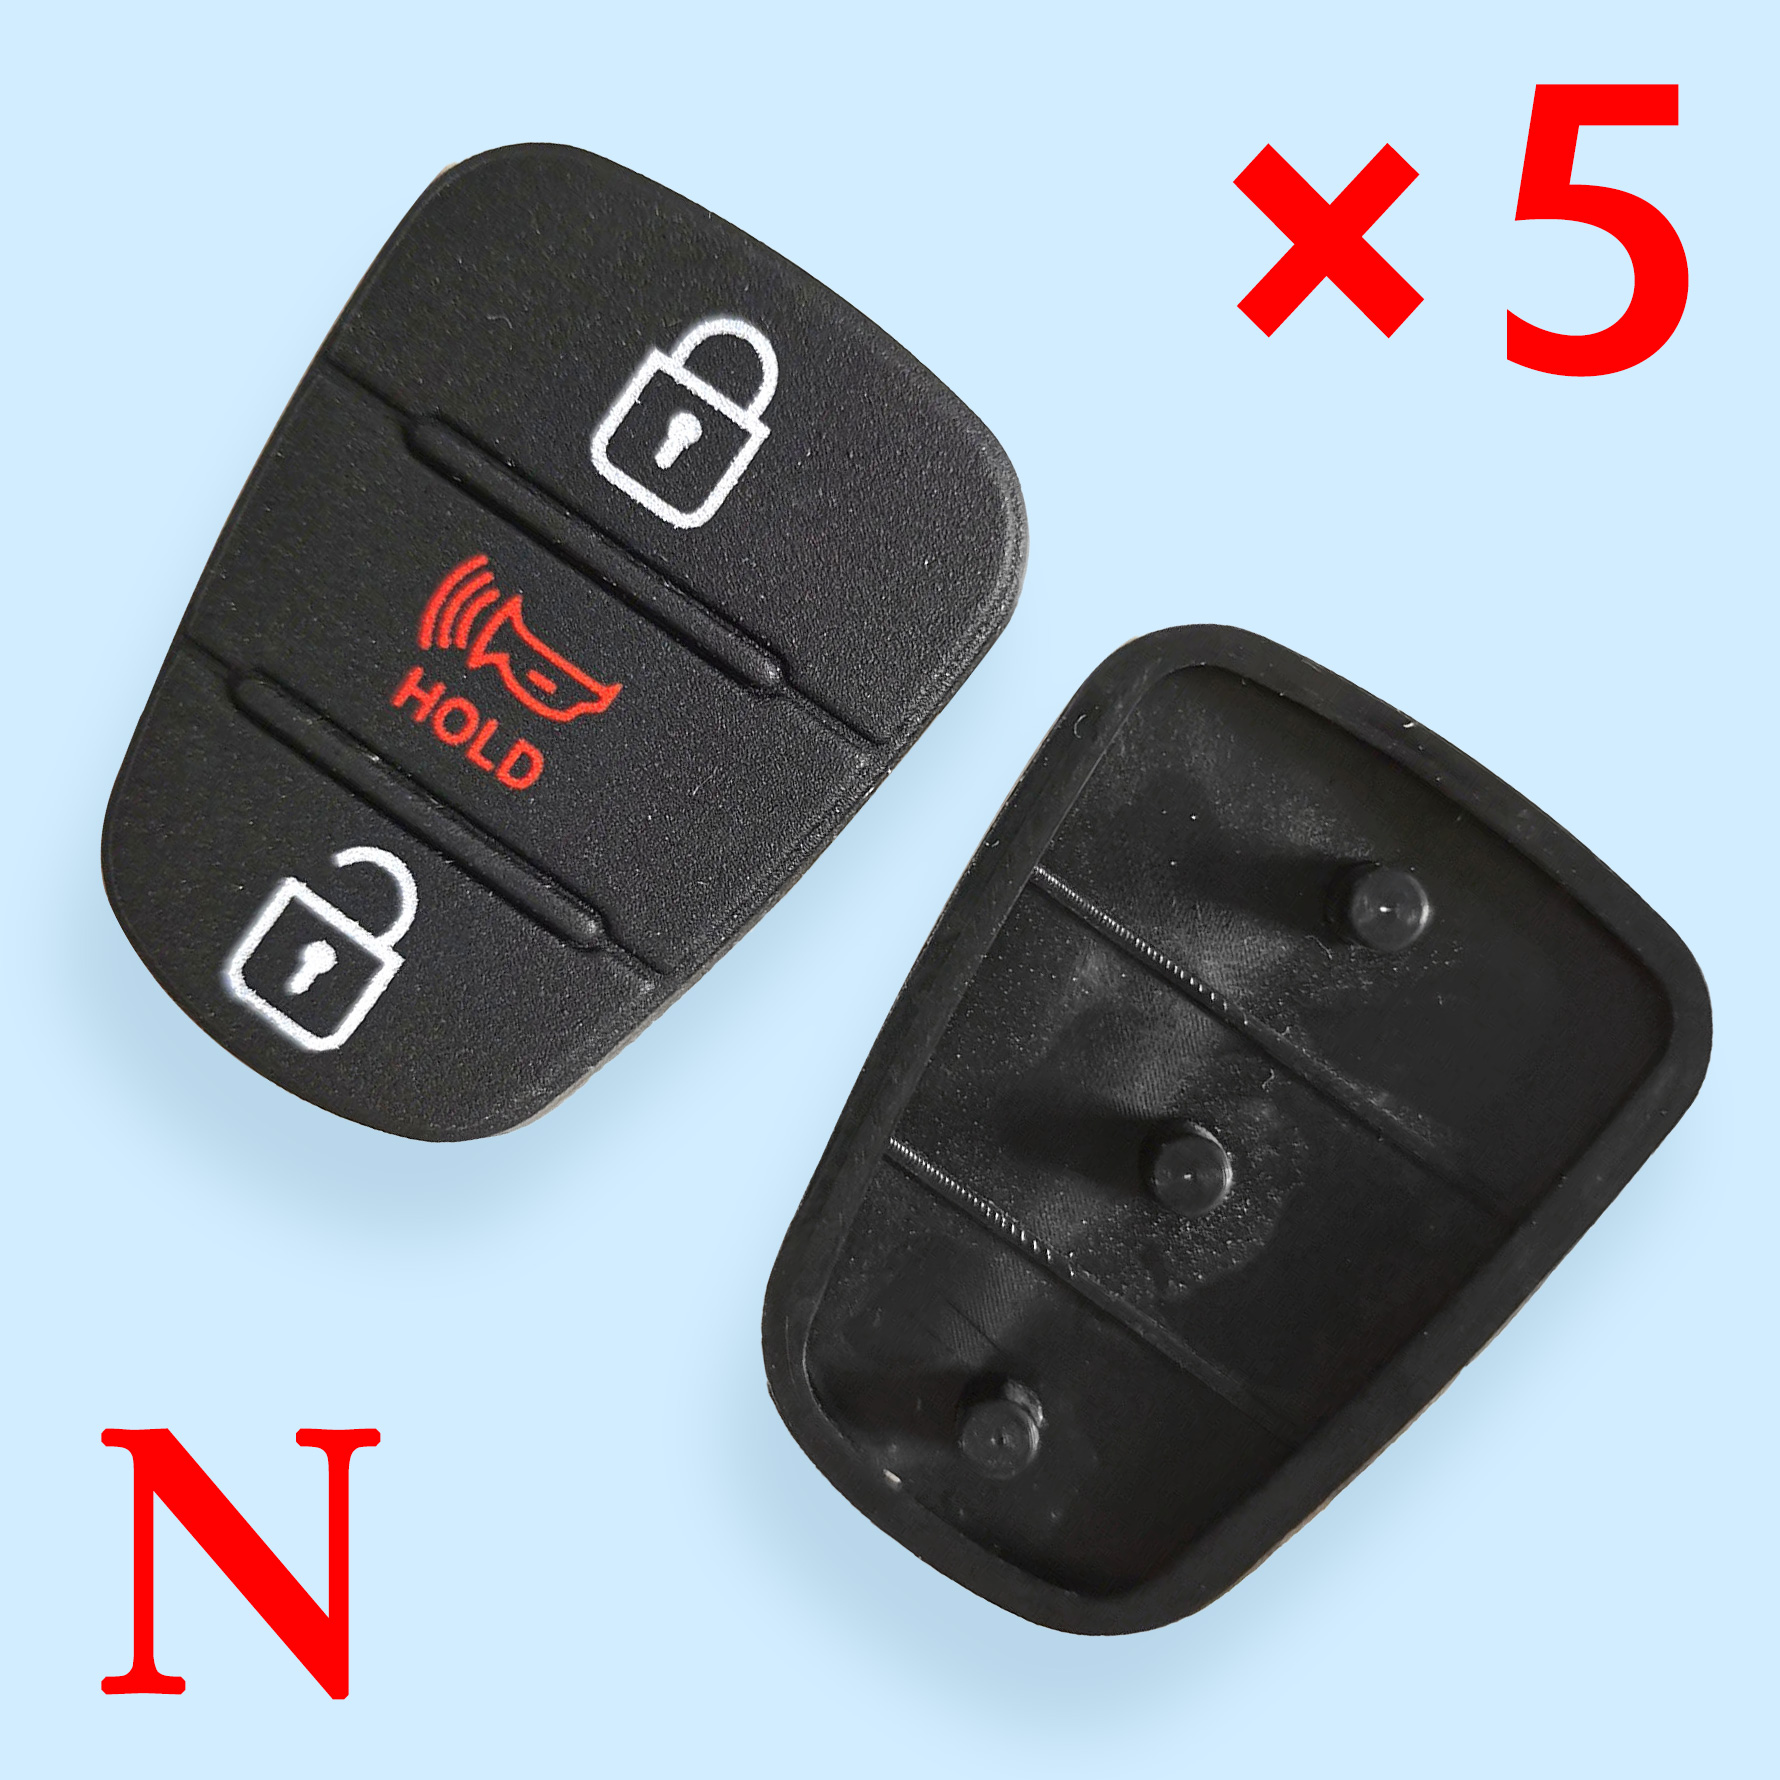 2 + 1 Buttons Rubber Pad for Hyundai  - 5 pcs